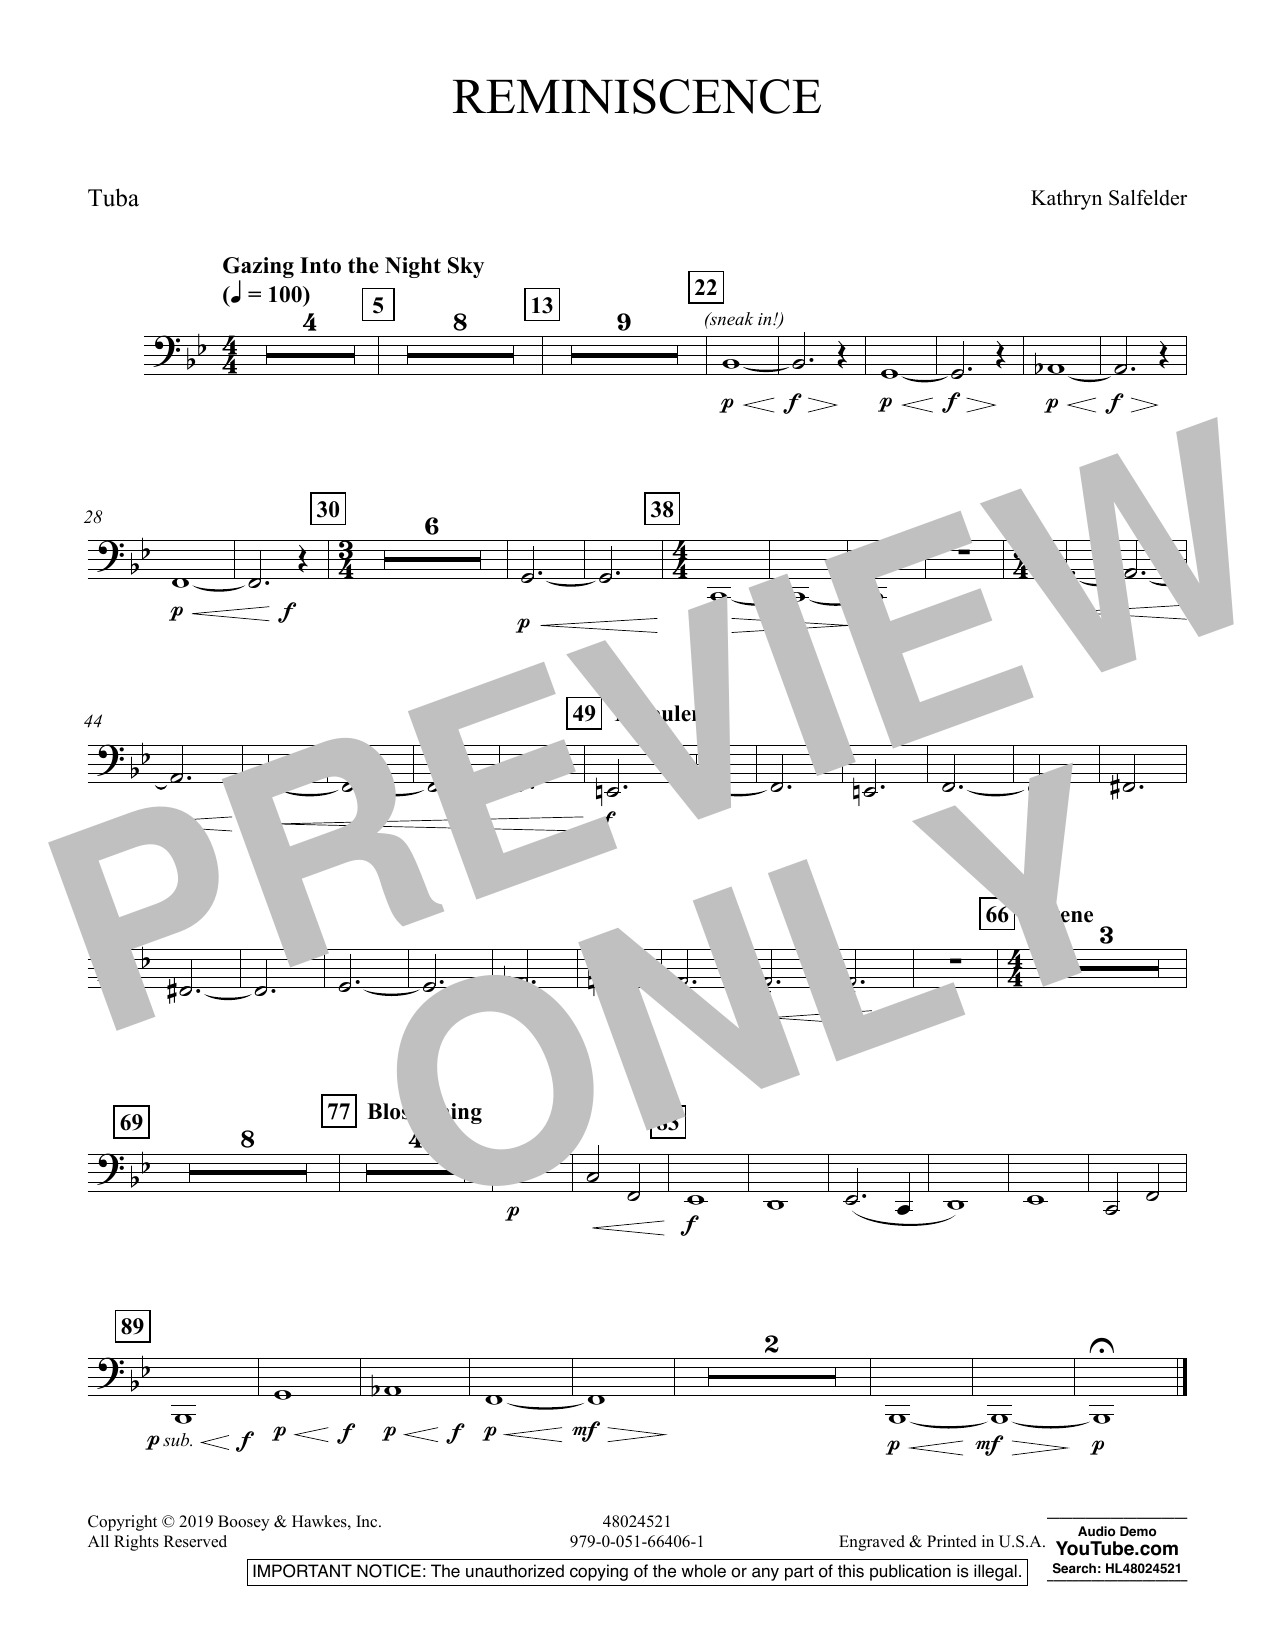 Kathryn Salfelder Reminiscence - Tuba sheet music preview music notes and score for Concert Band including 1 page(s)